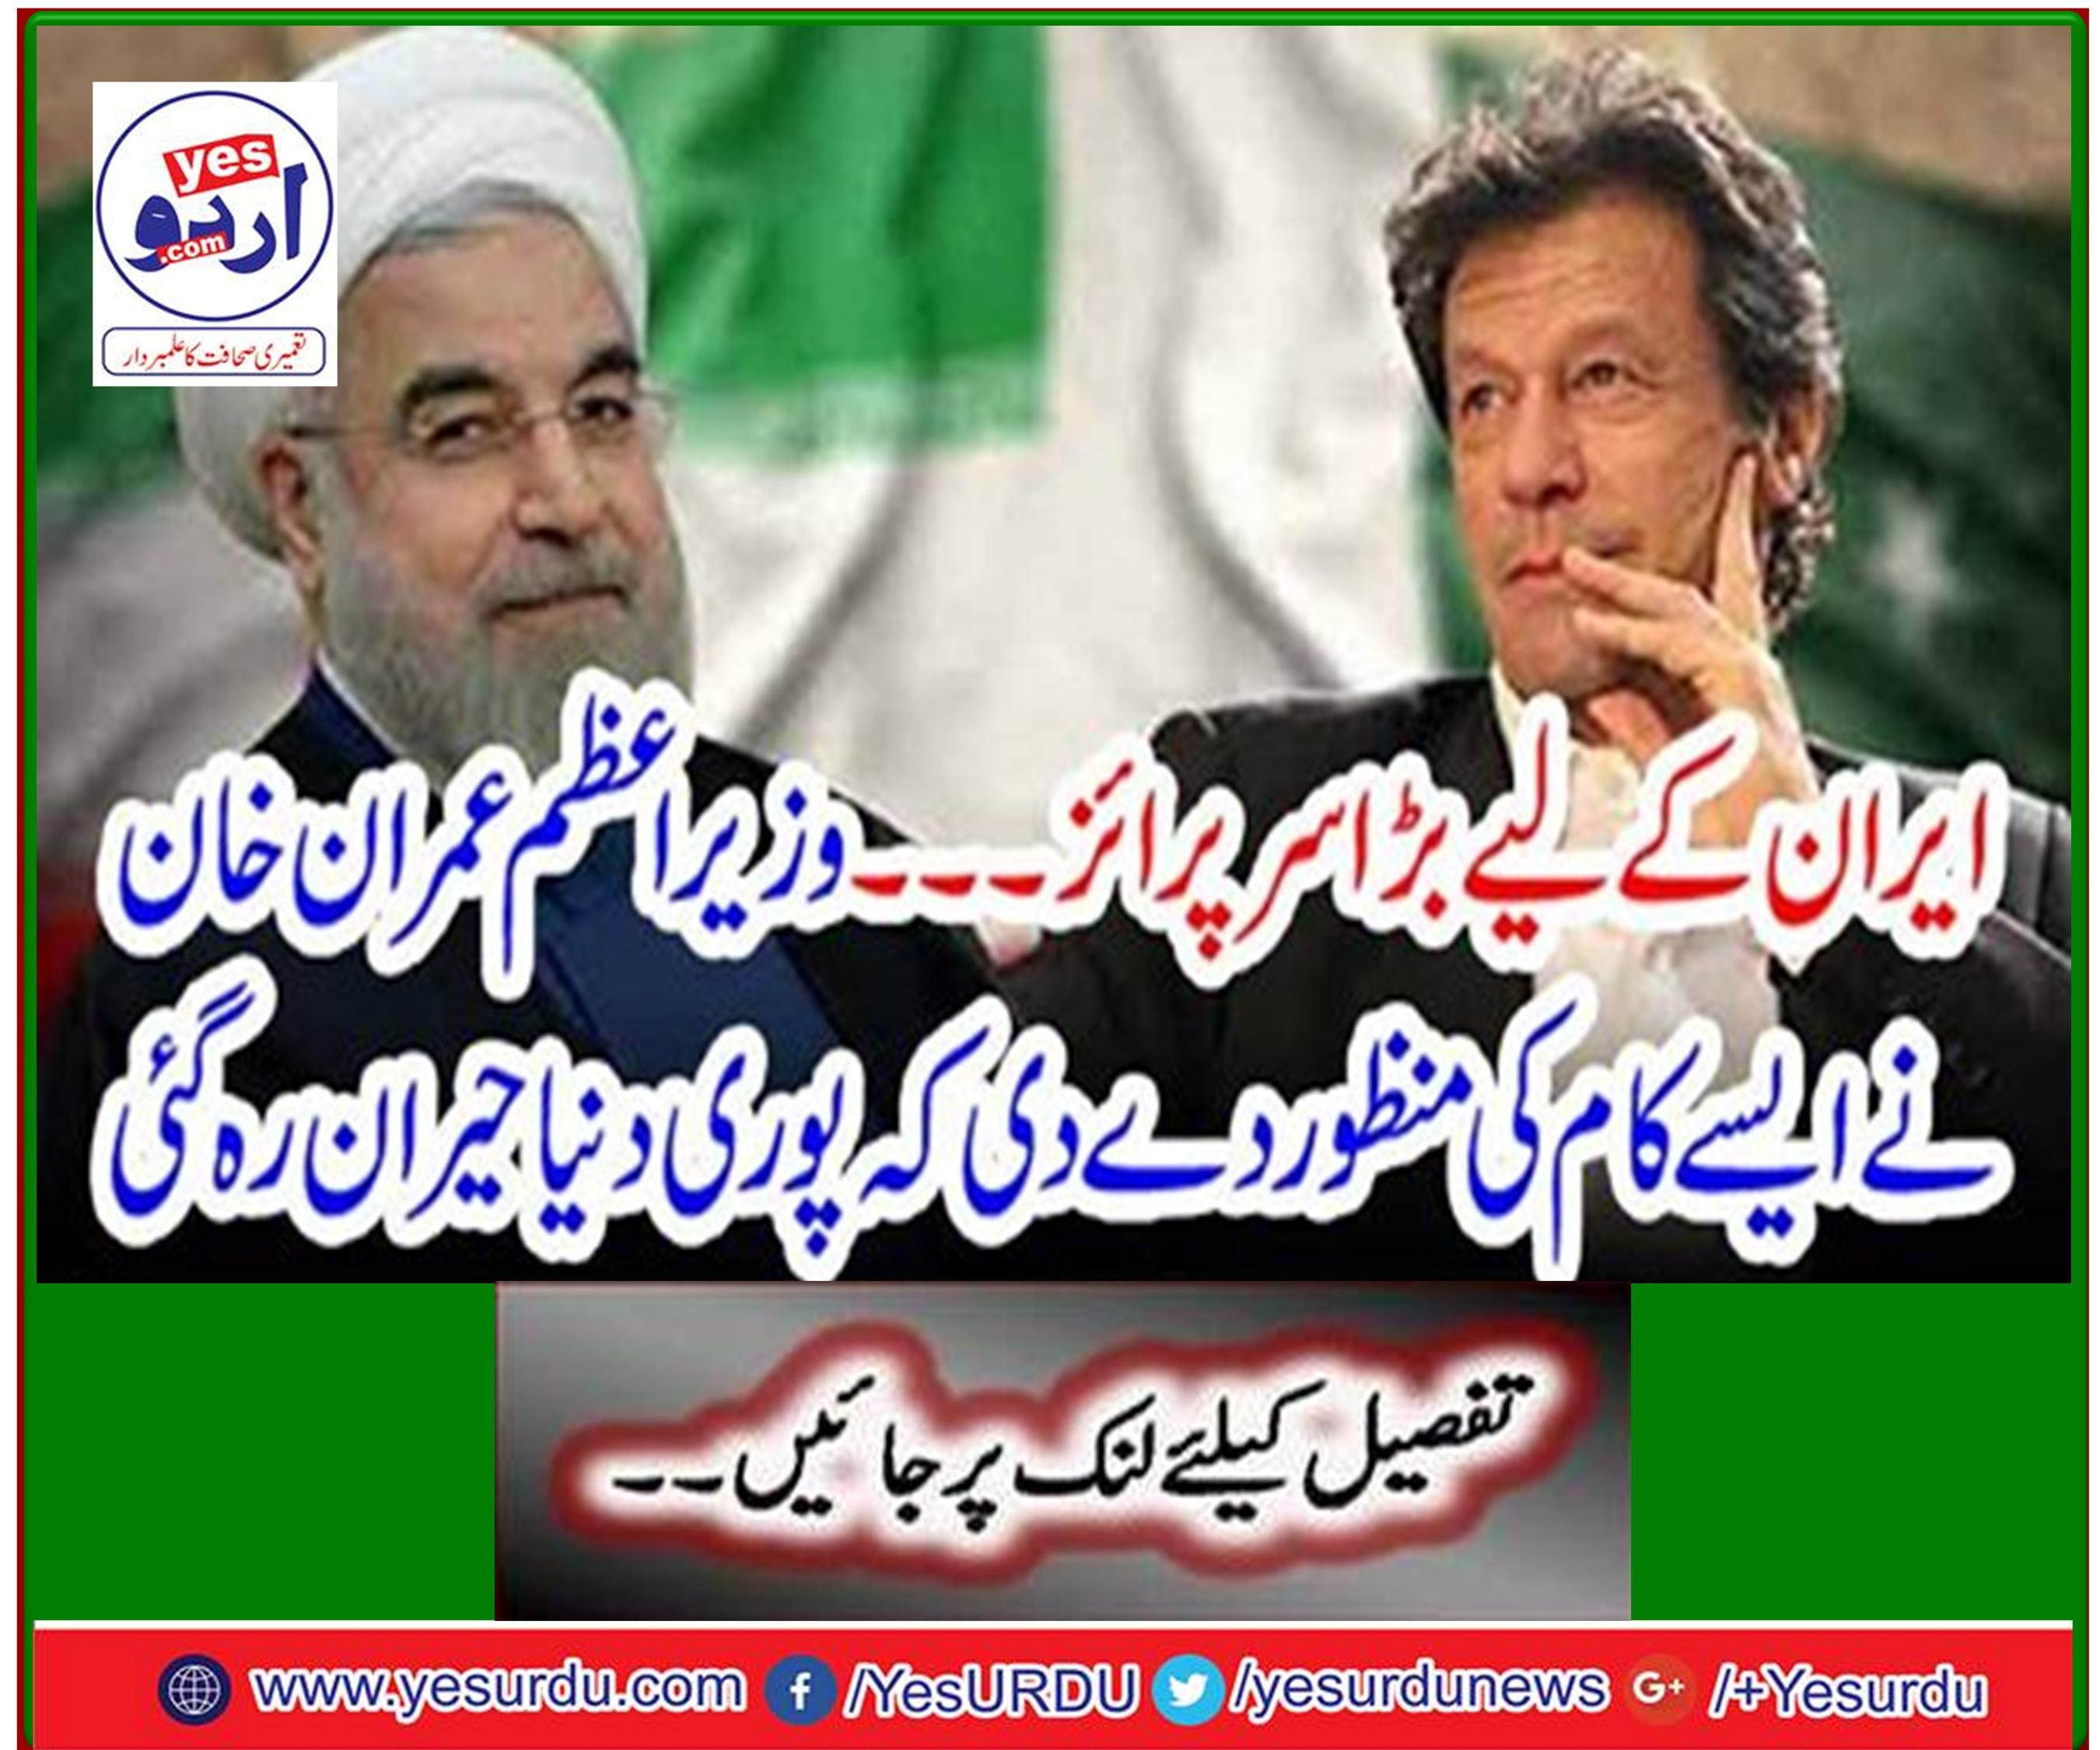 Big Surprise for Iran ... Prime Minister Imran Khan approved such work that the whole world was shocked